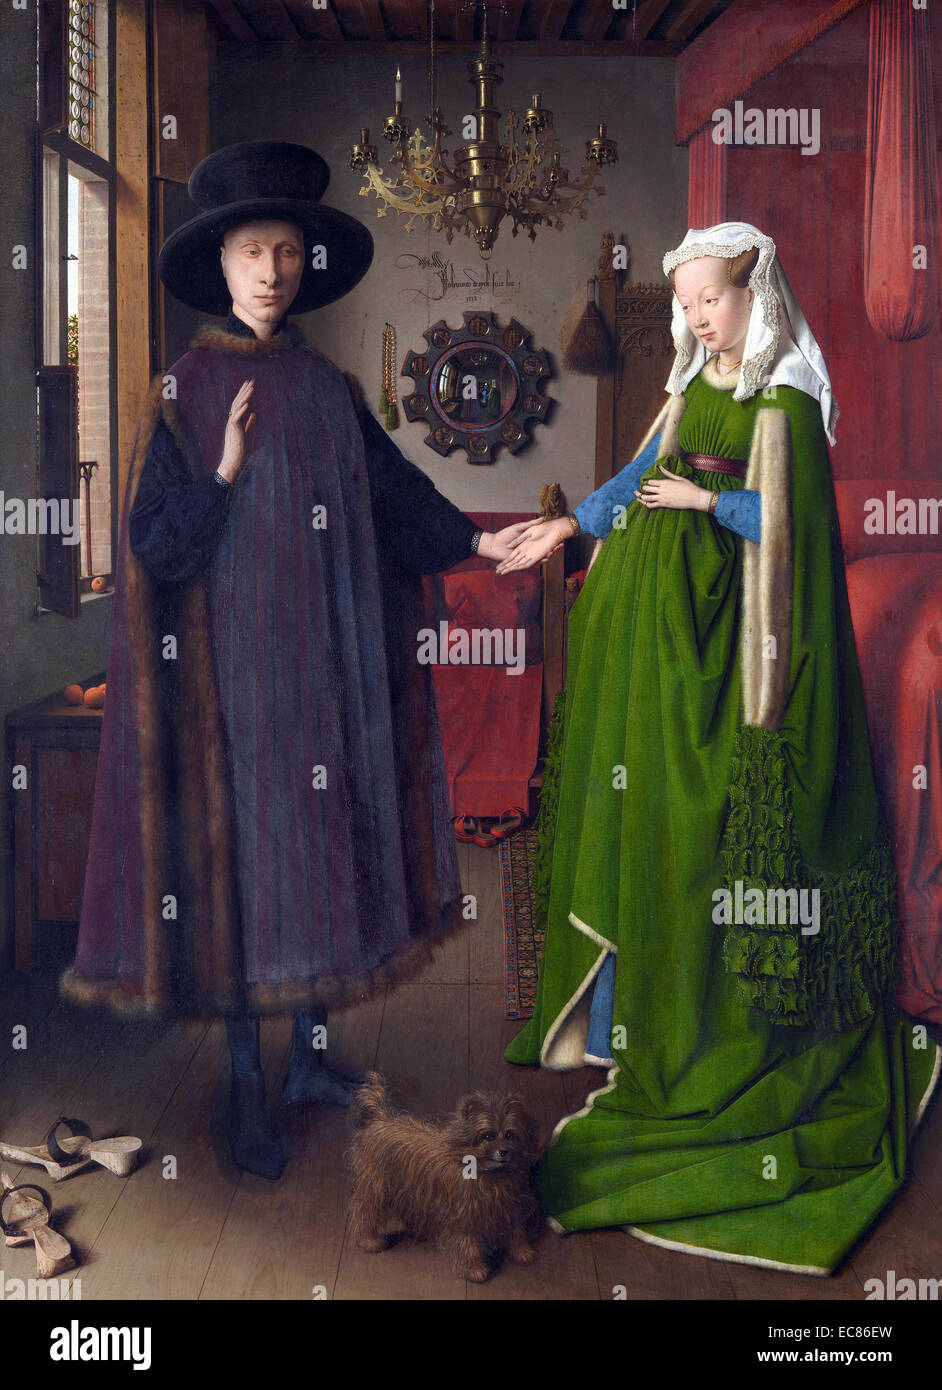 Painting titled 'The Arnolfini Portrait' painted by Jan van Eyck (1390-1441) Netherlandish painter. The painting is also known as 'The Arnolfini Wedding' Dated 15th Century Stock Photo